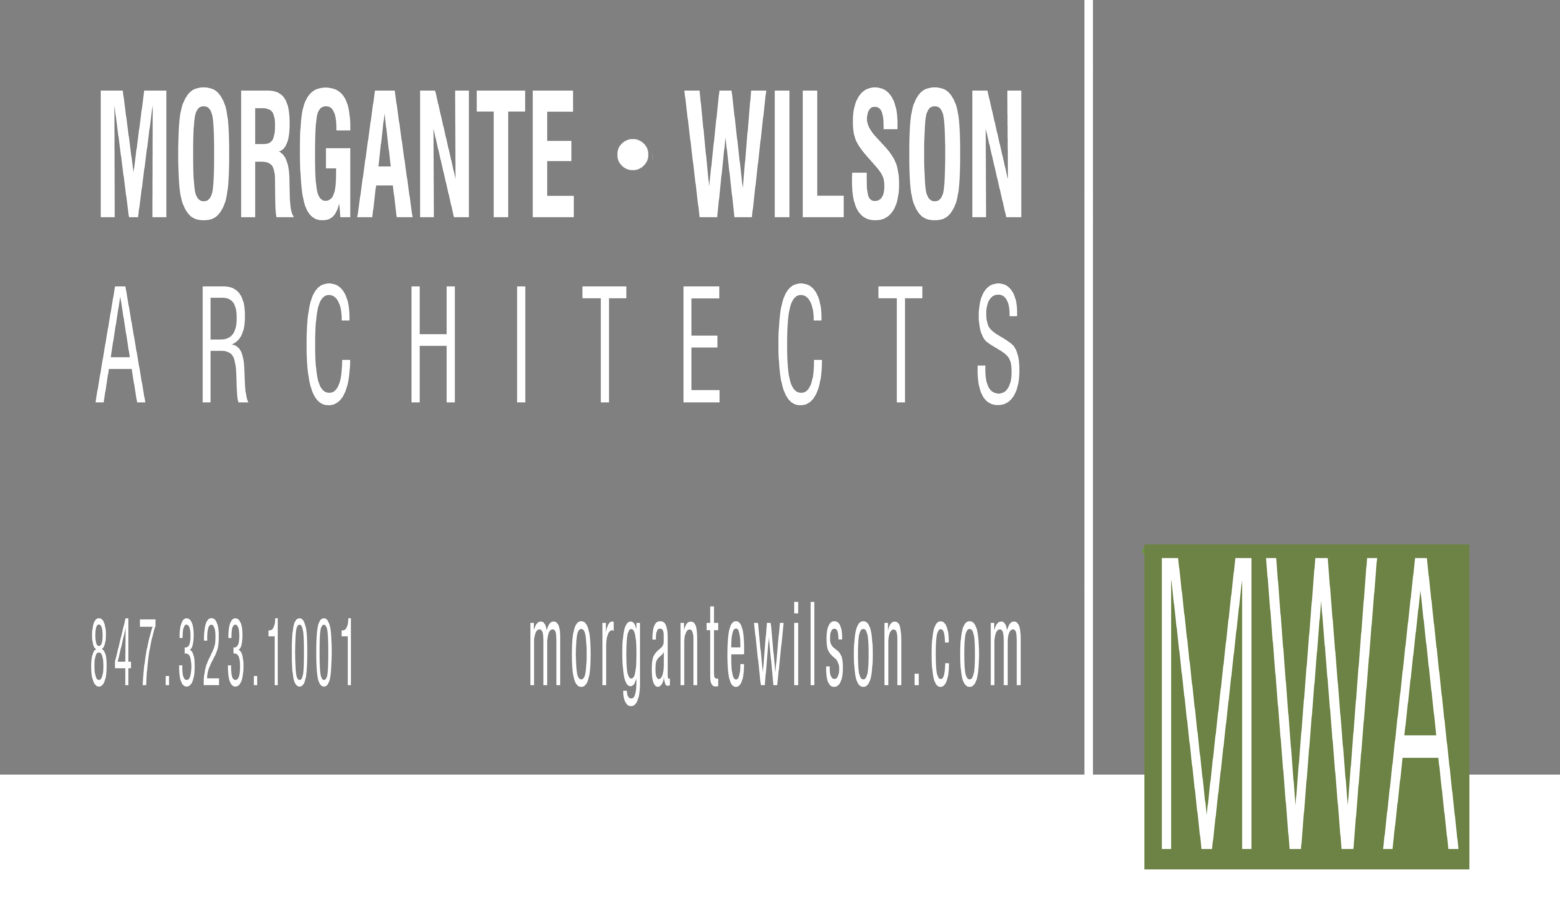 Morgante Wilson Architects Promotes 3 Project Managers to Associates